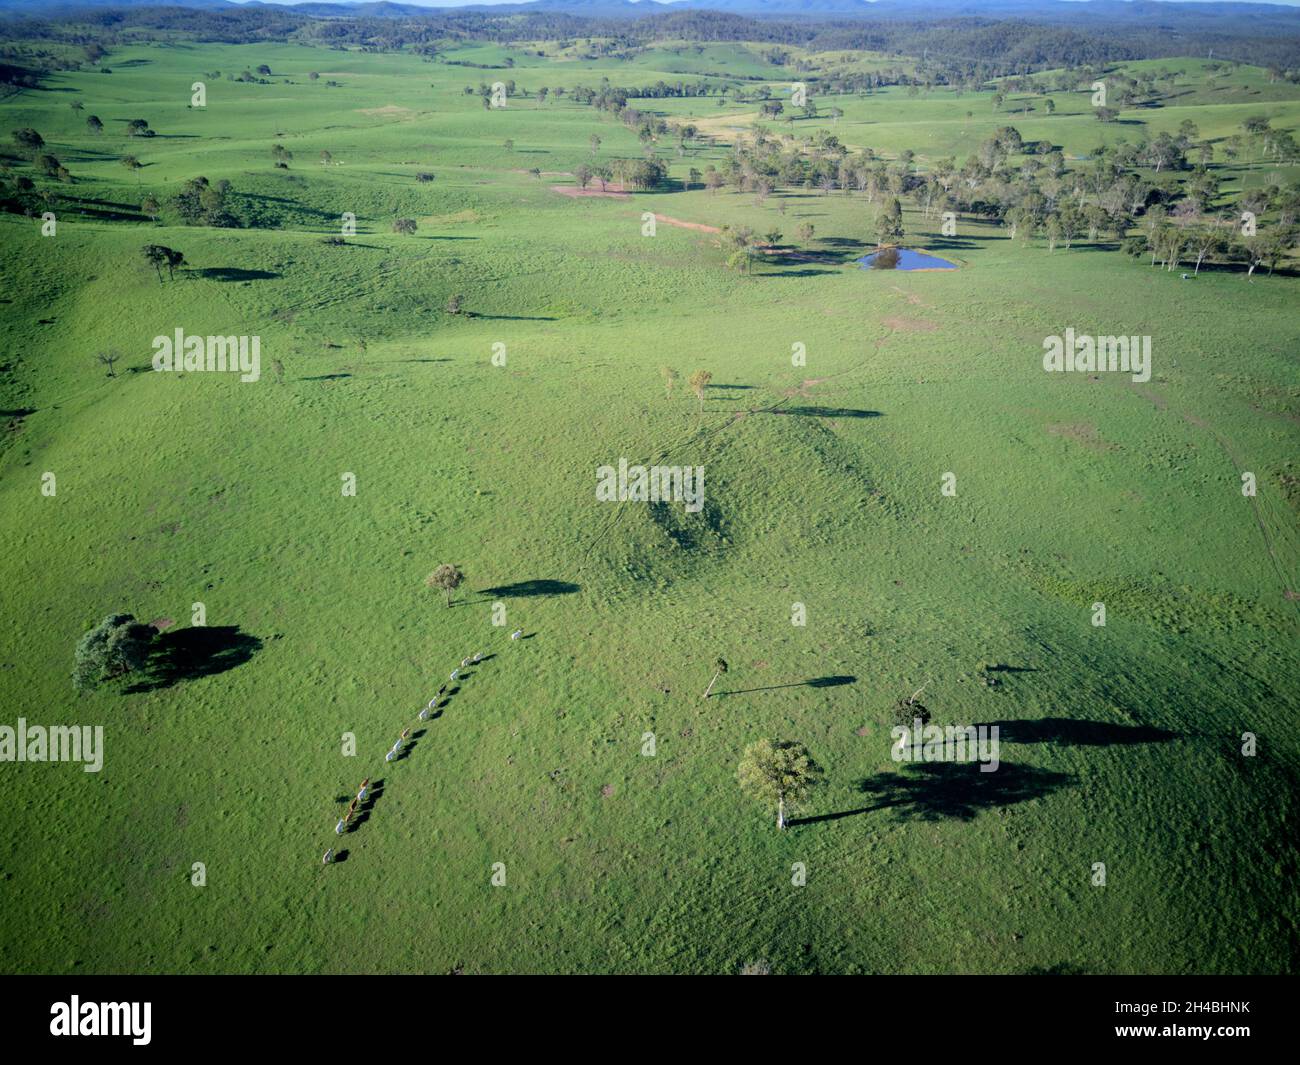 Aerial of rolling green hills of pastoral landscape for cattle grazing at Boompa near Biggenden Queensland Australia Stock Photo